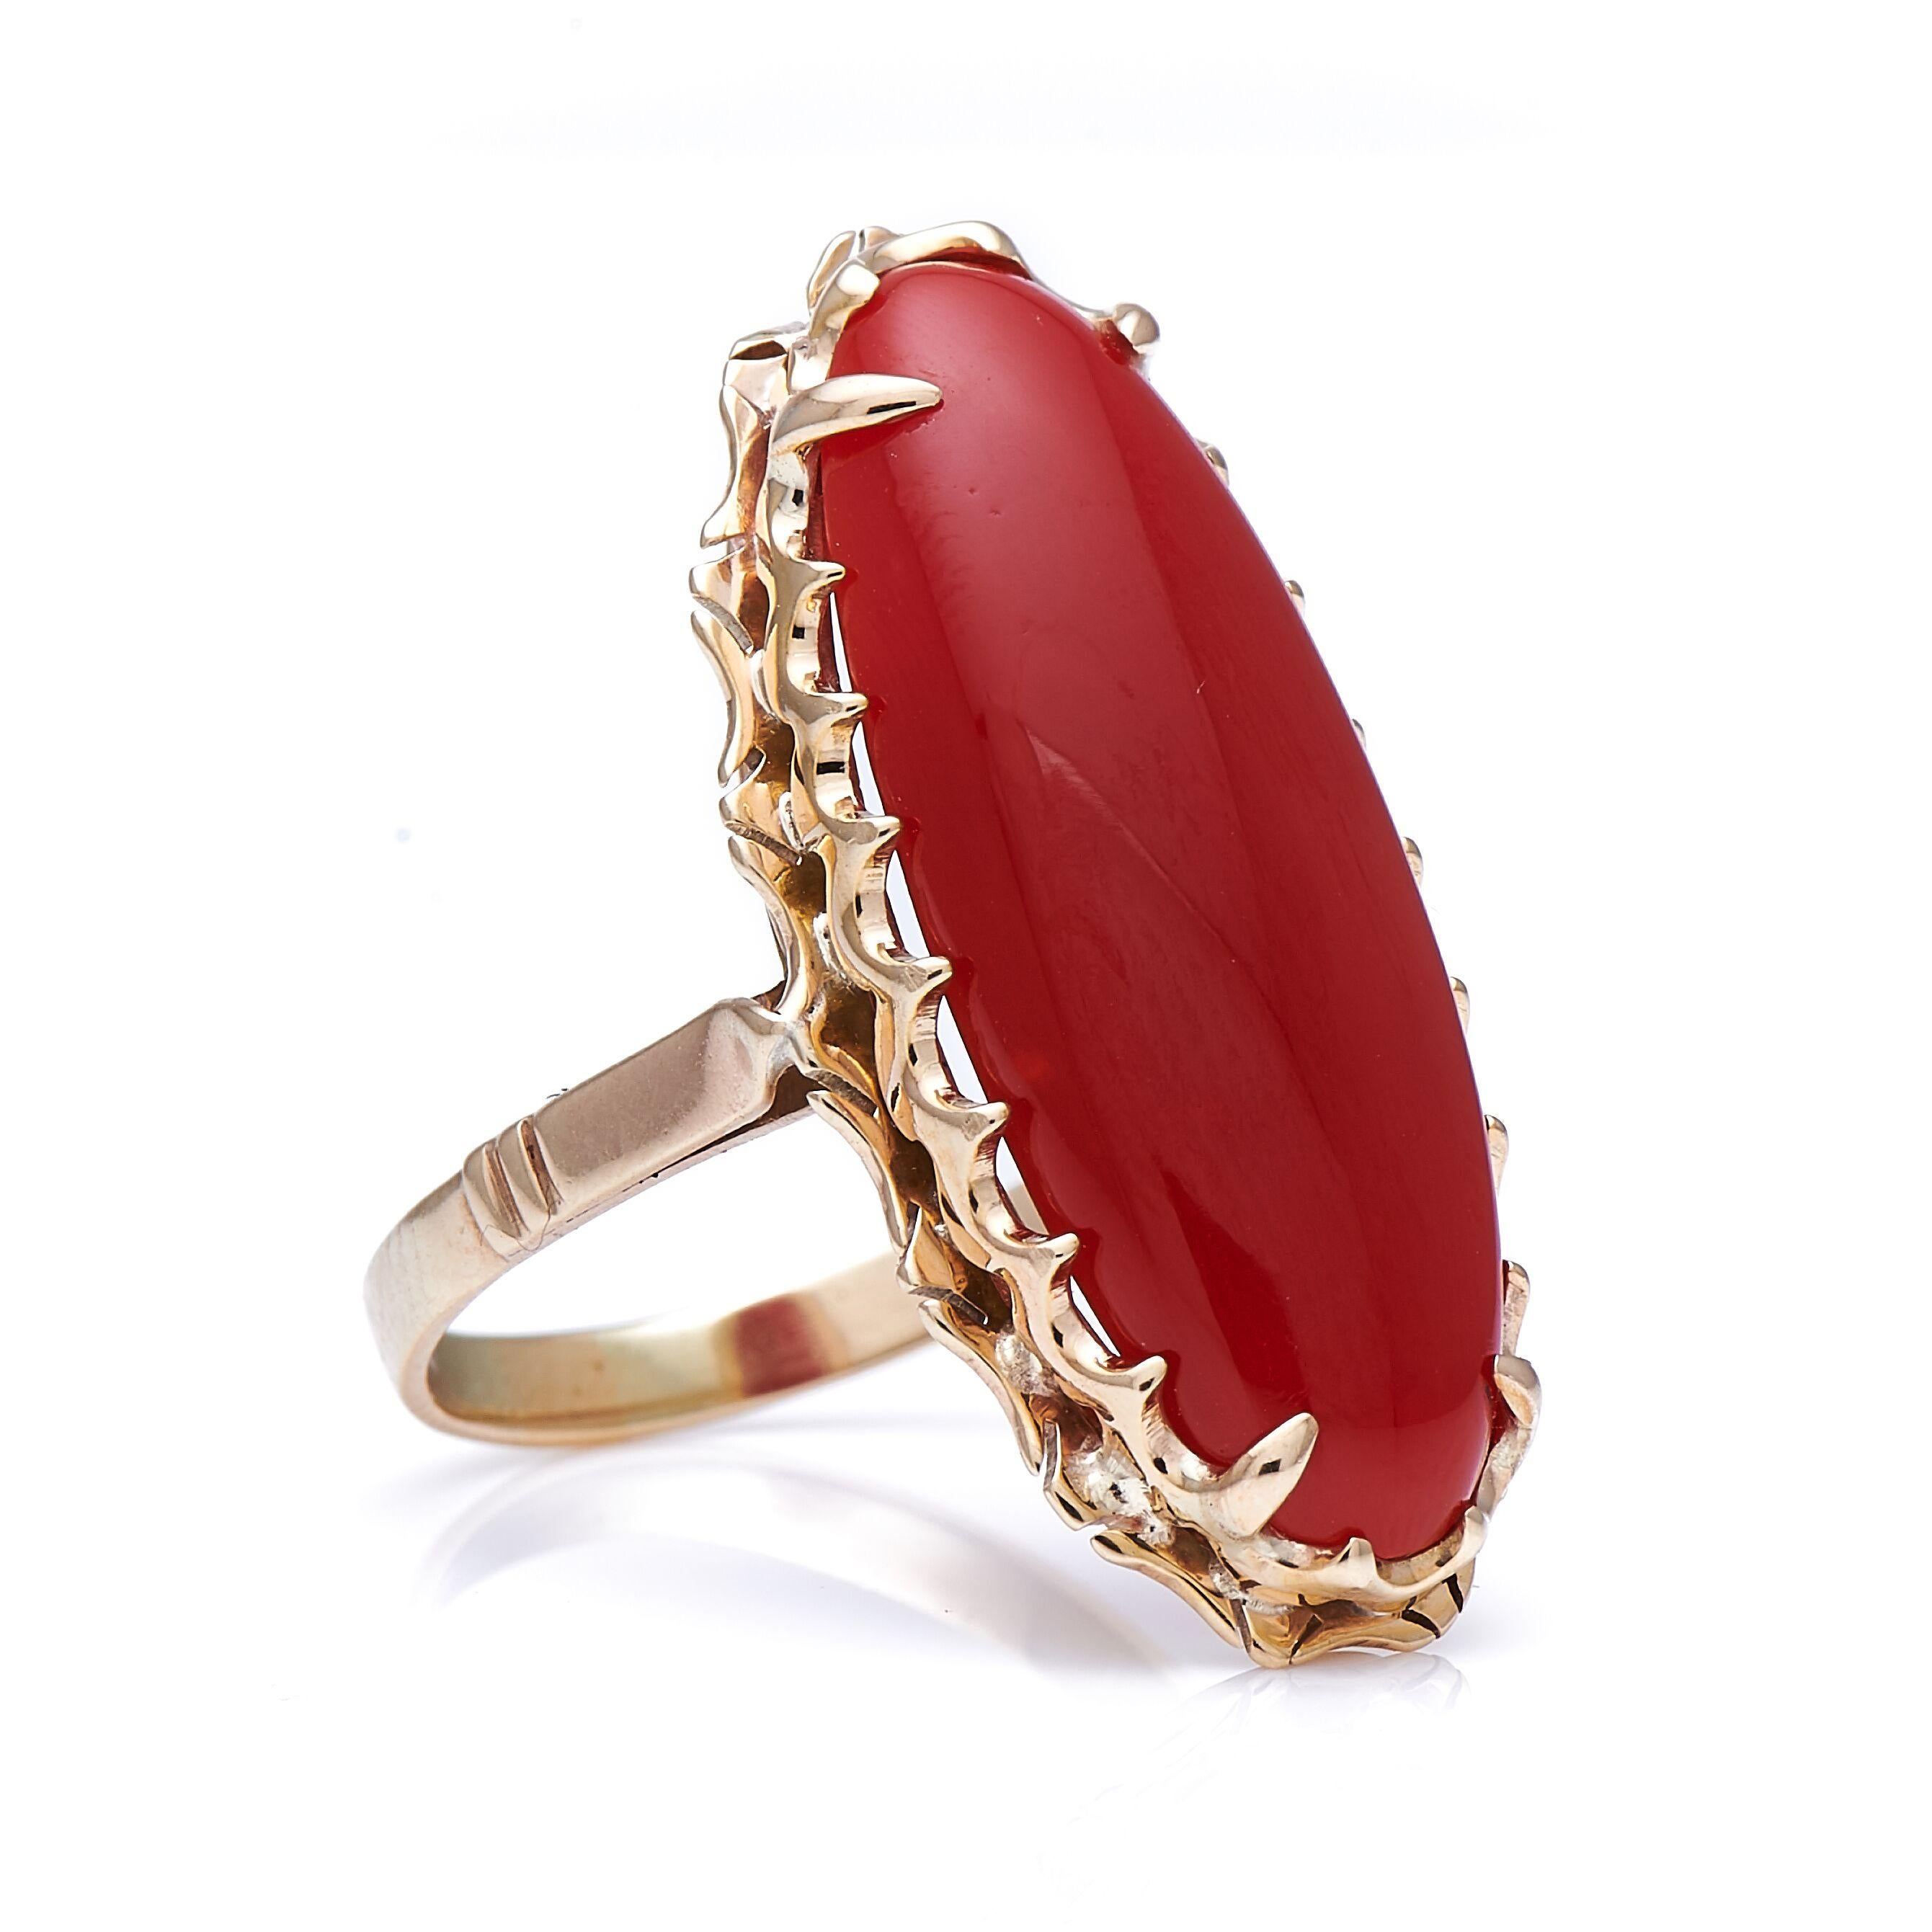 Coral ring, late 19th century. This ring is set with a large coral cabochon, set in a plain, galleried mount. Coral jewels experienced a surge in popularity in the early 19th century, when the European middle and upper classes embarked on ‘Grand